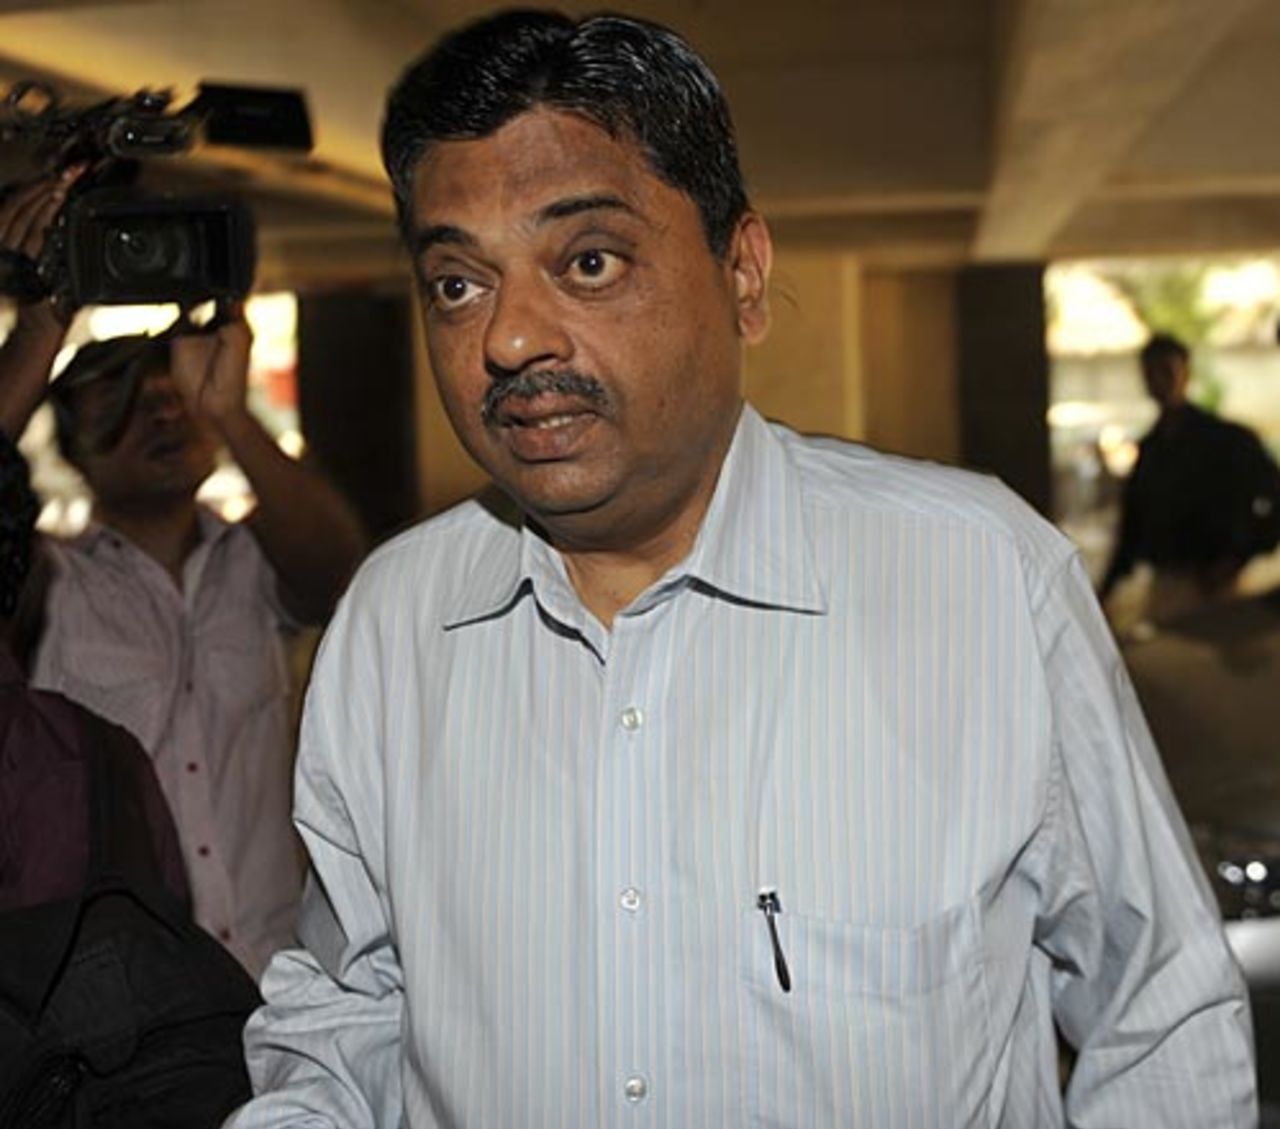 Ratnakar Shetty, the BCCI chief administrative officer, arrives for the IPL governing council meeting, Mumbai, April 26, 2010